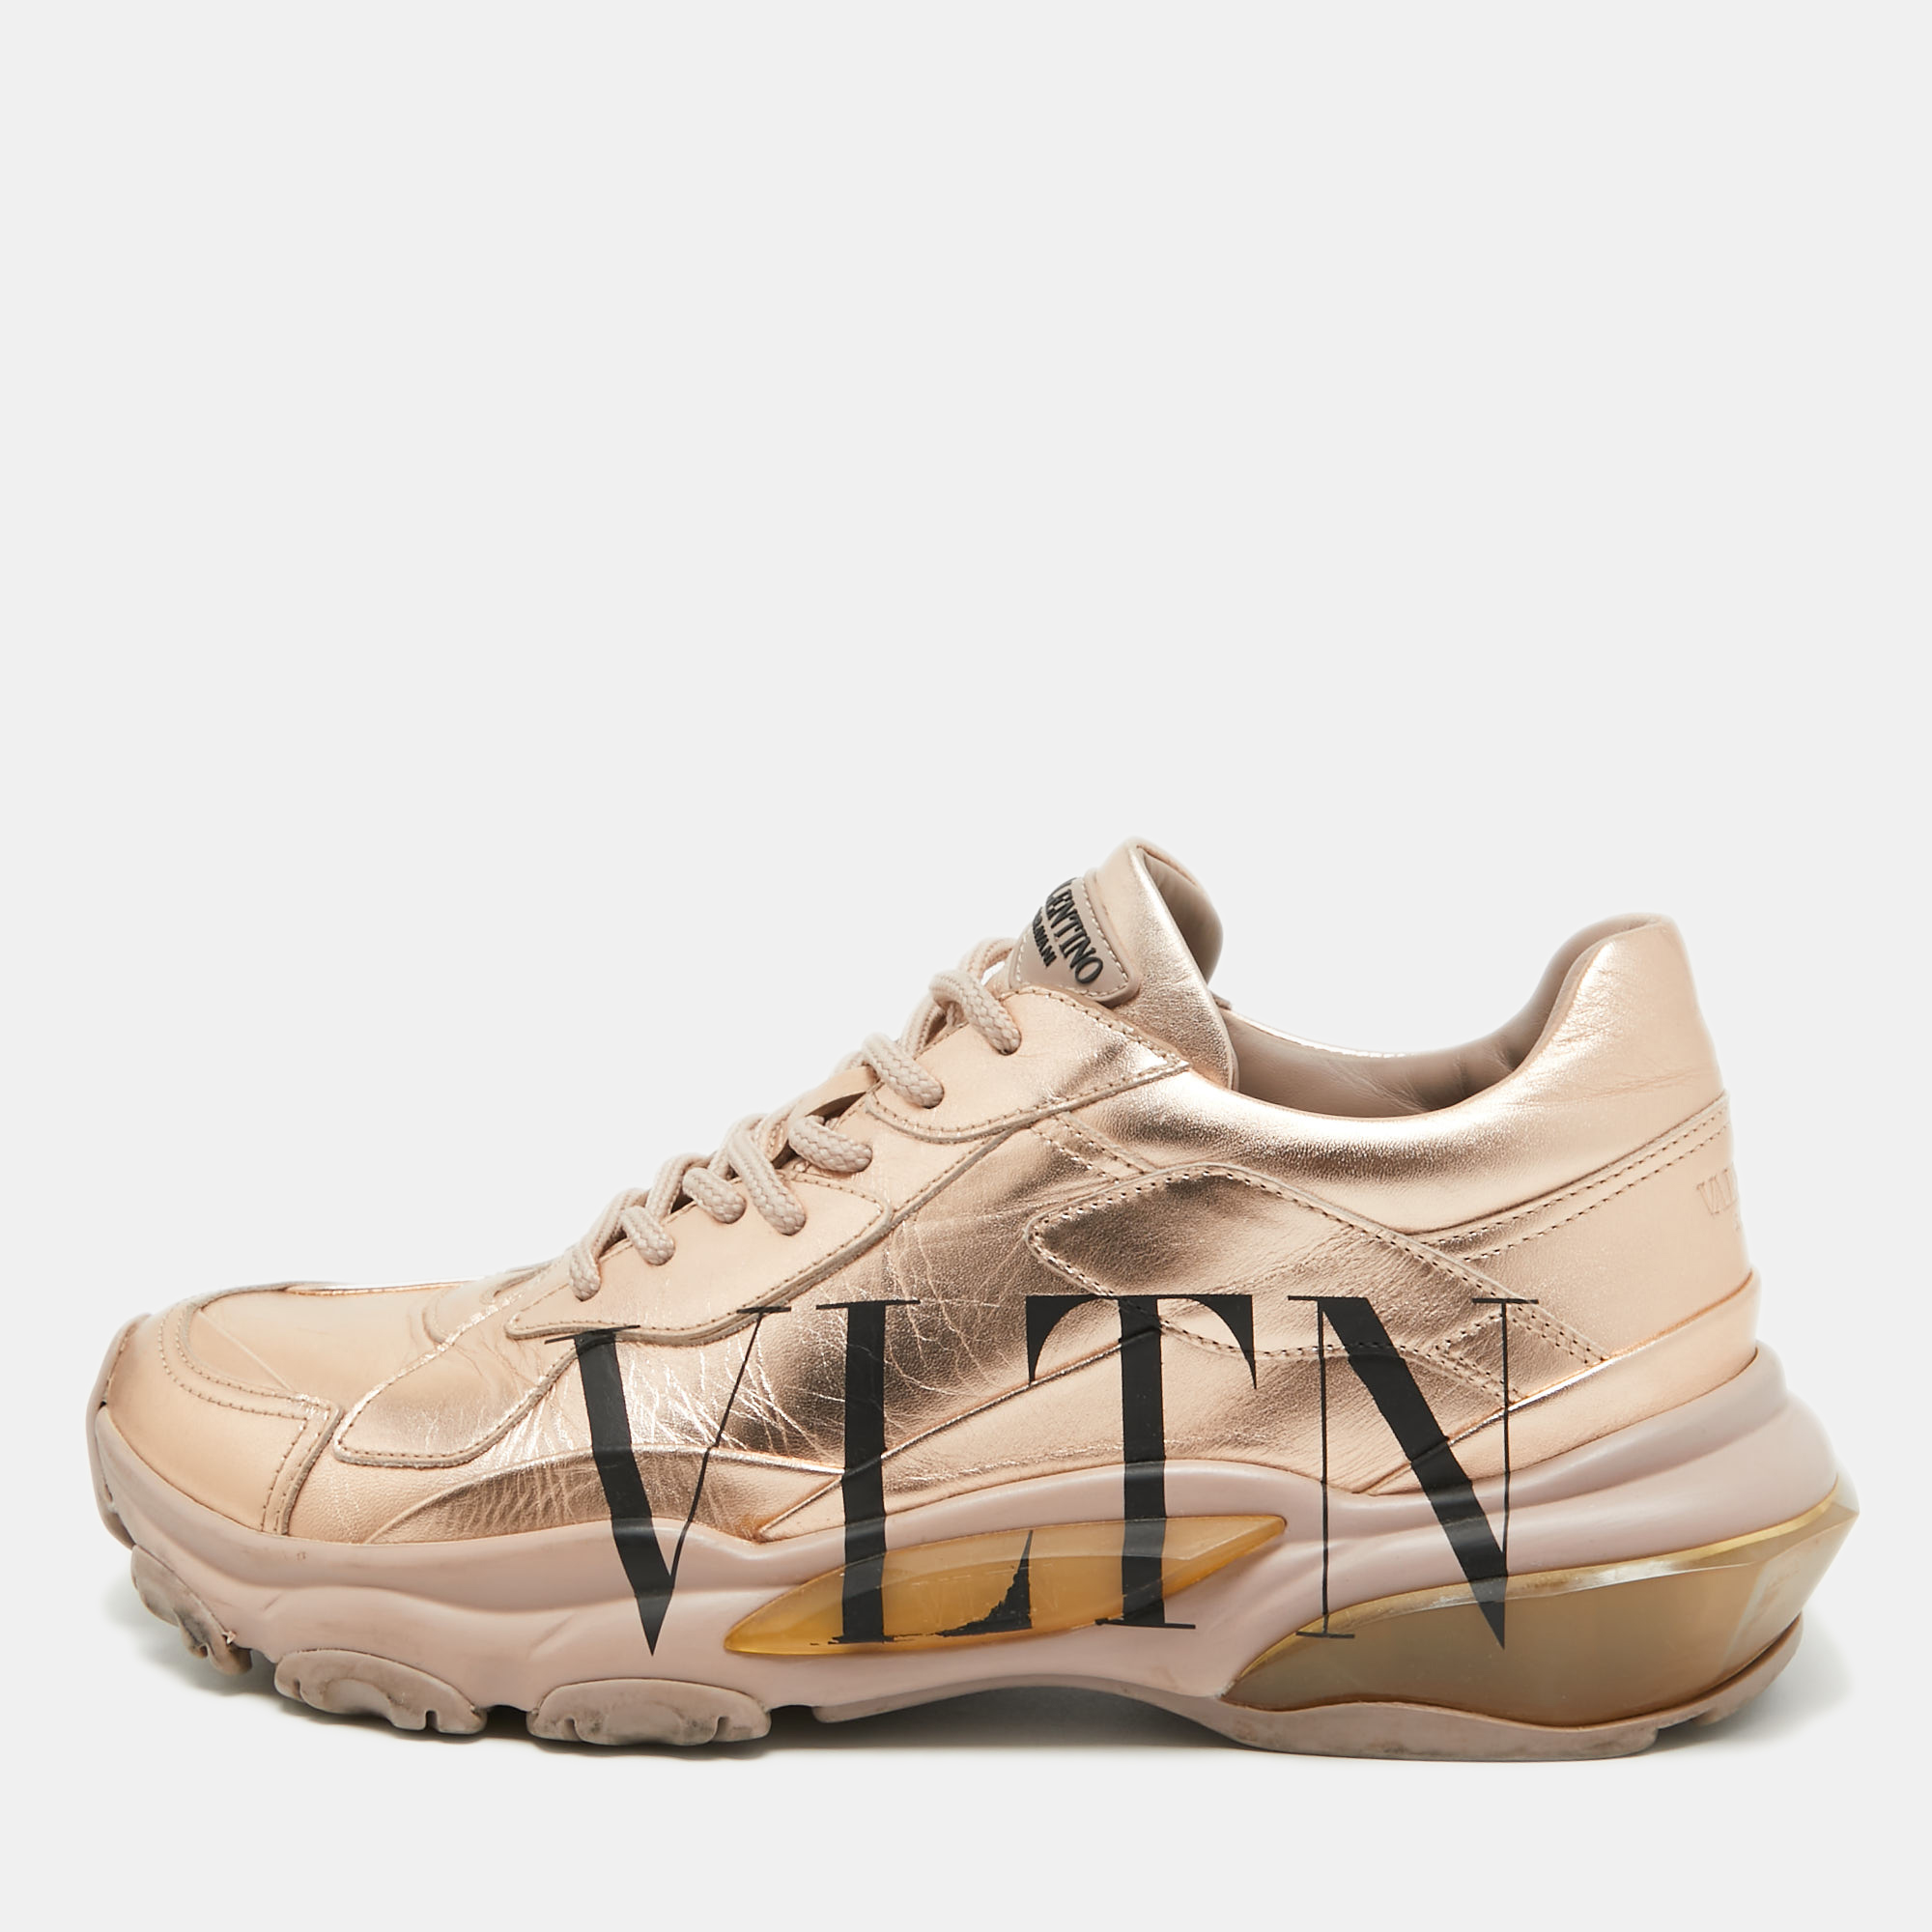 Coming in a classic silhouette these Valentino sneakers are a seamless combination of luxury comfort and style. These sneakers are designed with signature details and comfortable insoles.